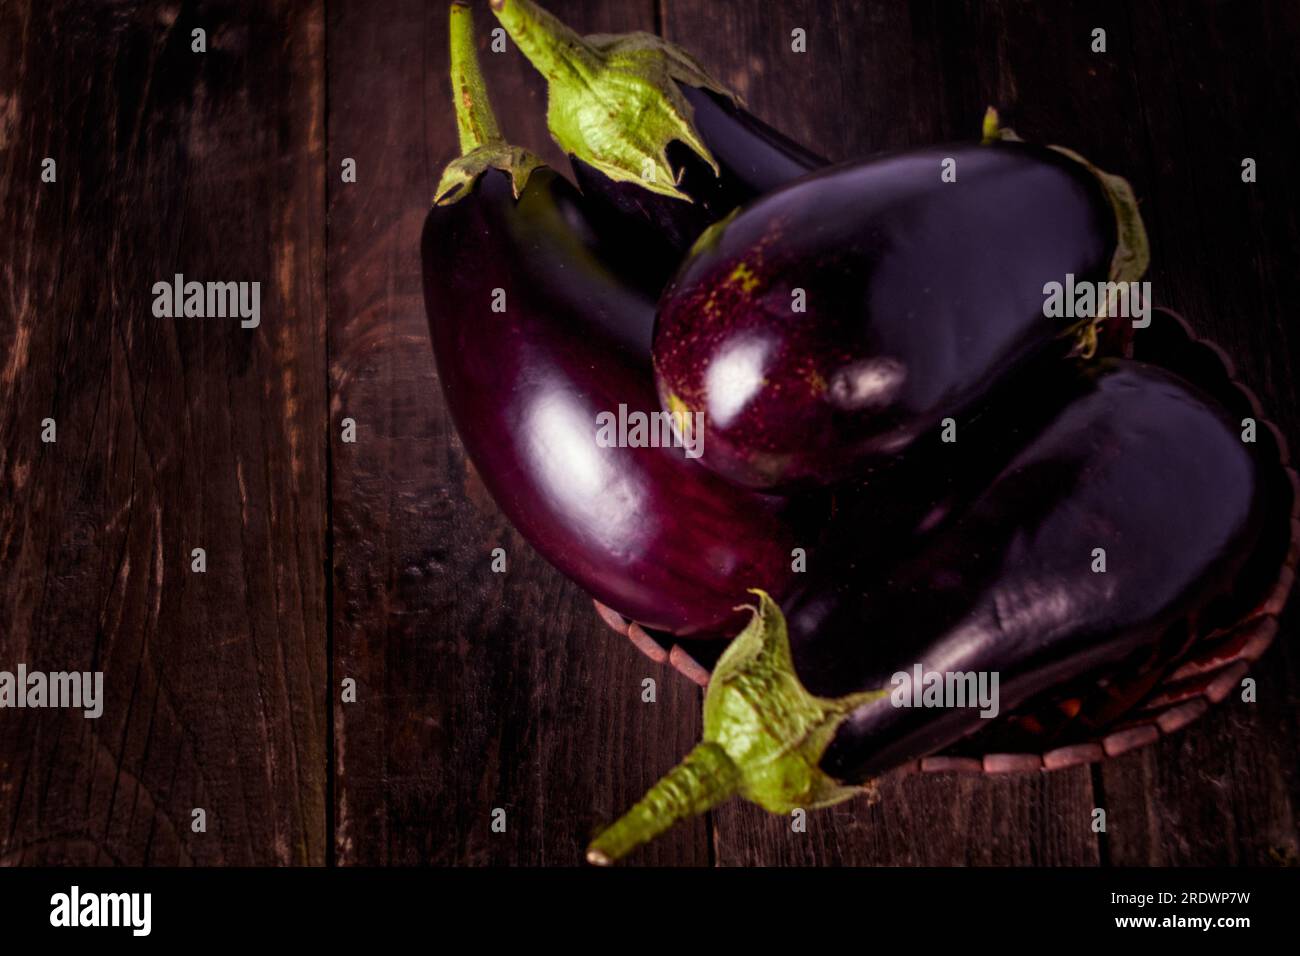 Close-up Several Eggplants On A Wooden Table in a Wooden Basket Stock Photo